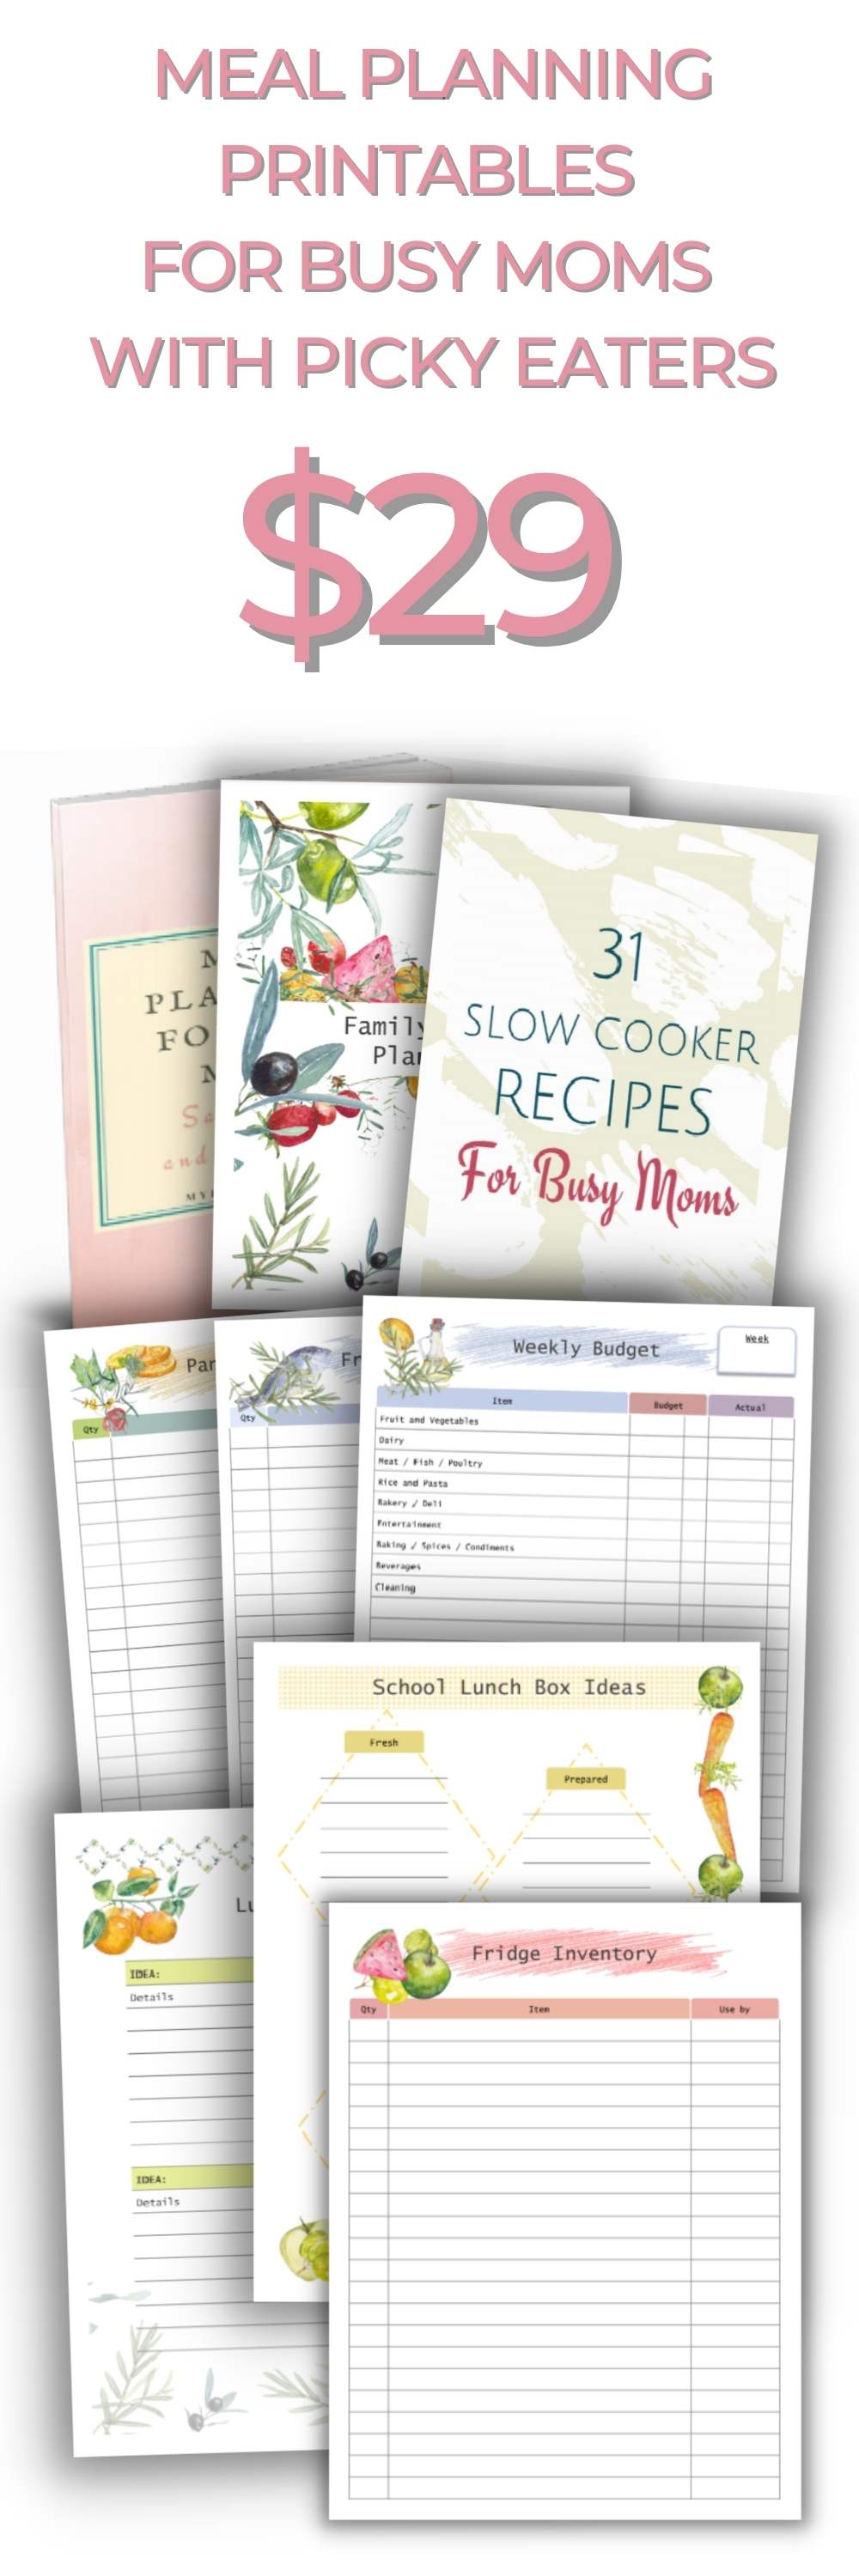 Meal planning printables for busy moms